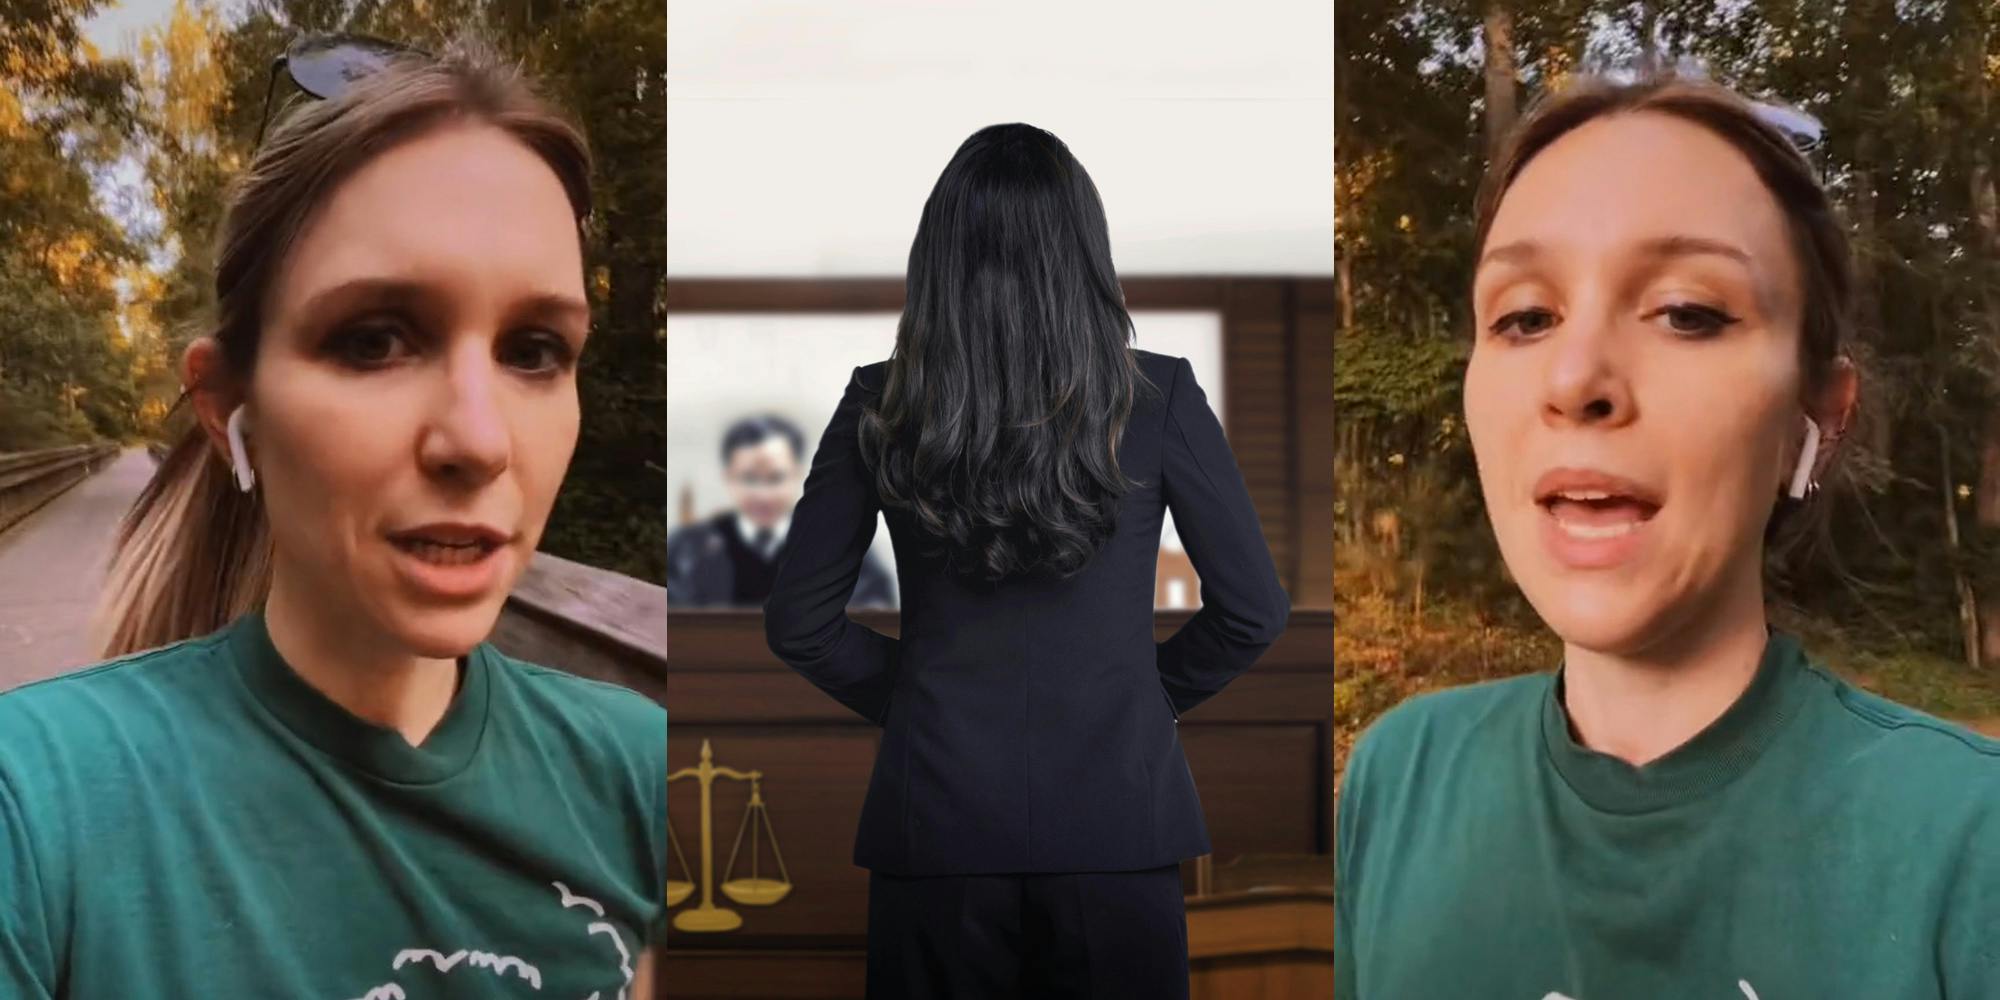 woman jogging outside speaking (l) female attorney standing in court judge blurred (c) woman jogging speaking (r)